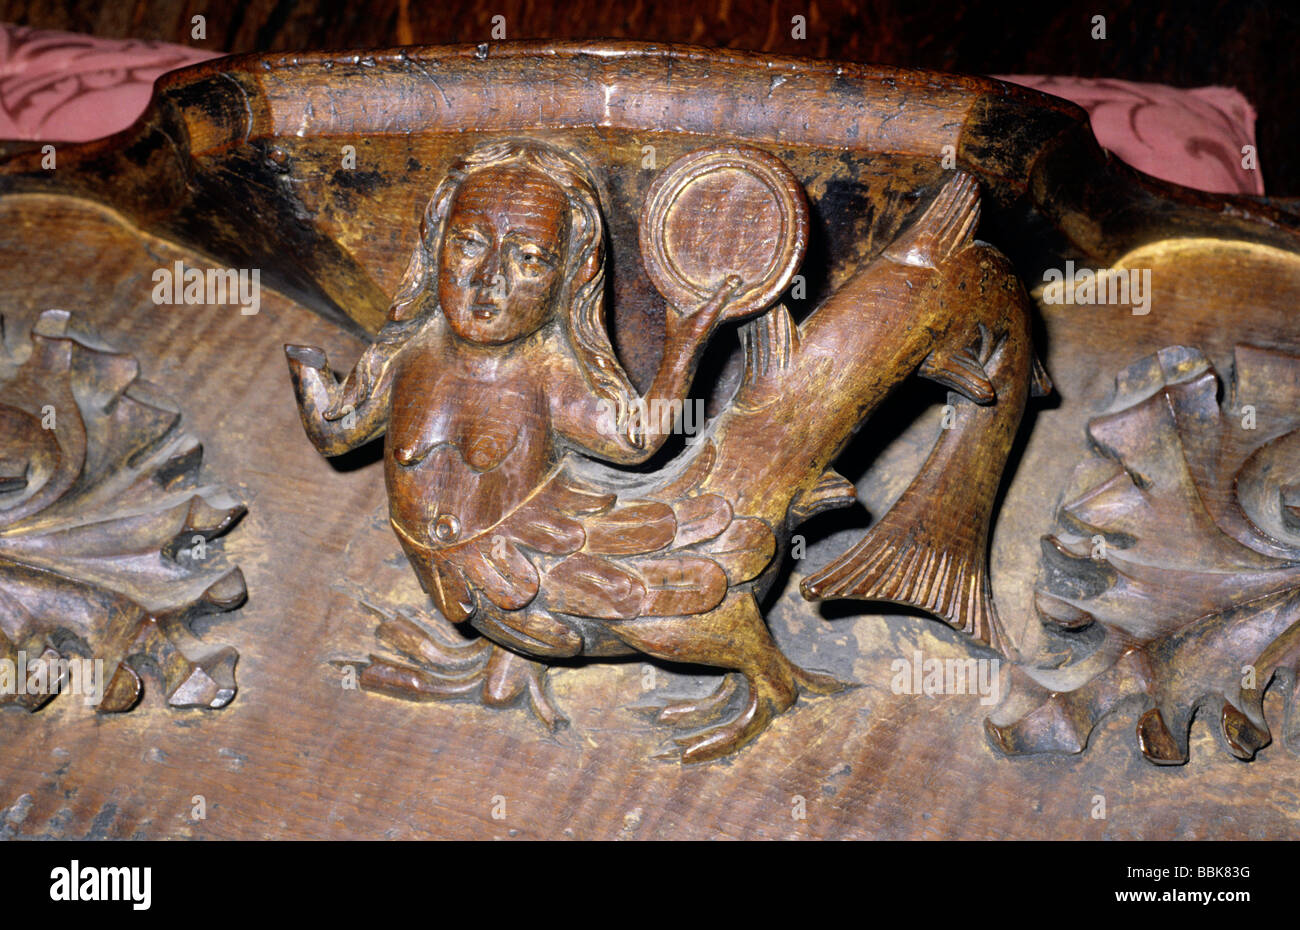 Carlisle Cathedral Misericord Mythical creature 15th century medieval wood carving Cumbria England UK English cathedrals Stock Photo